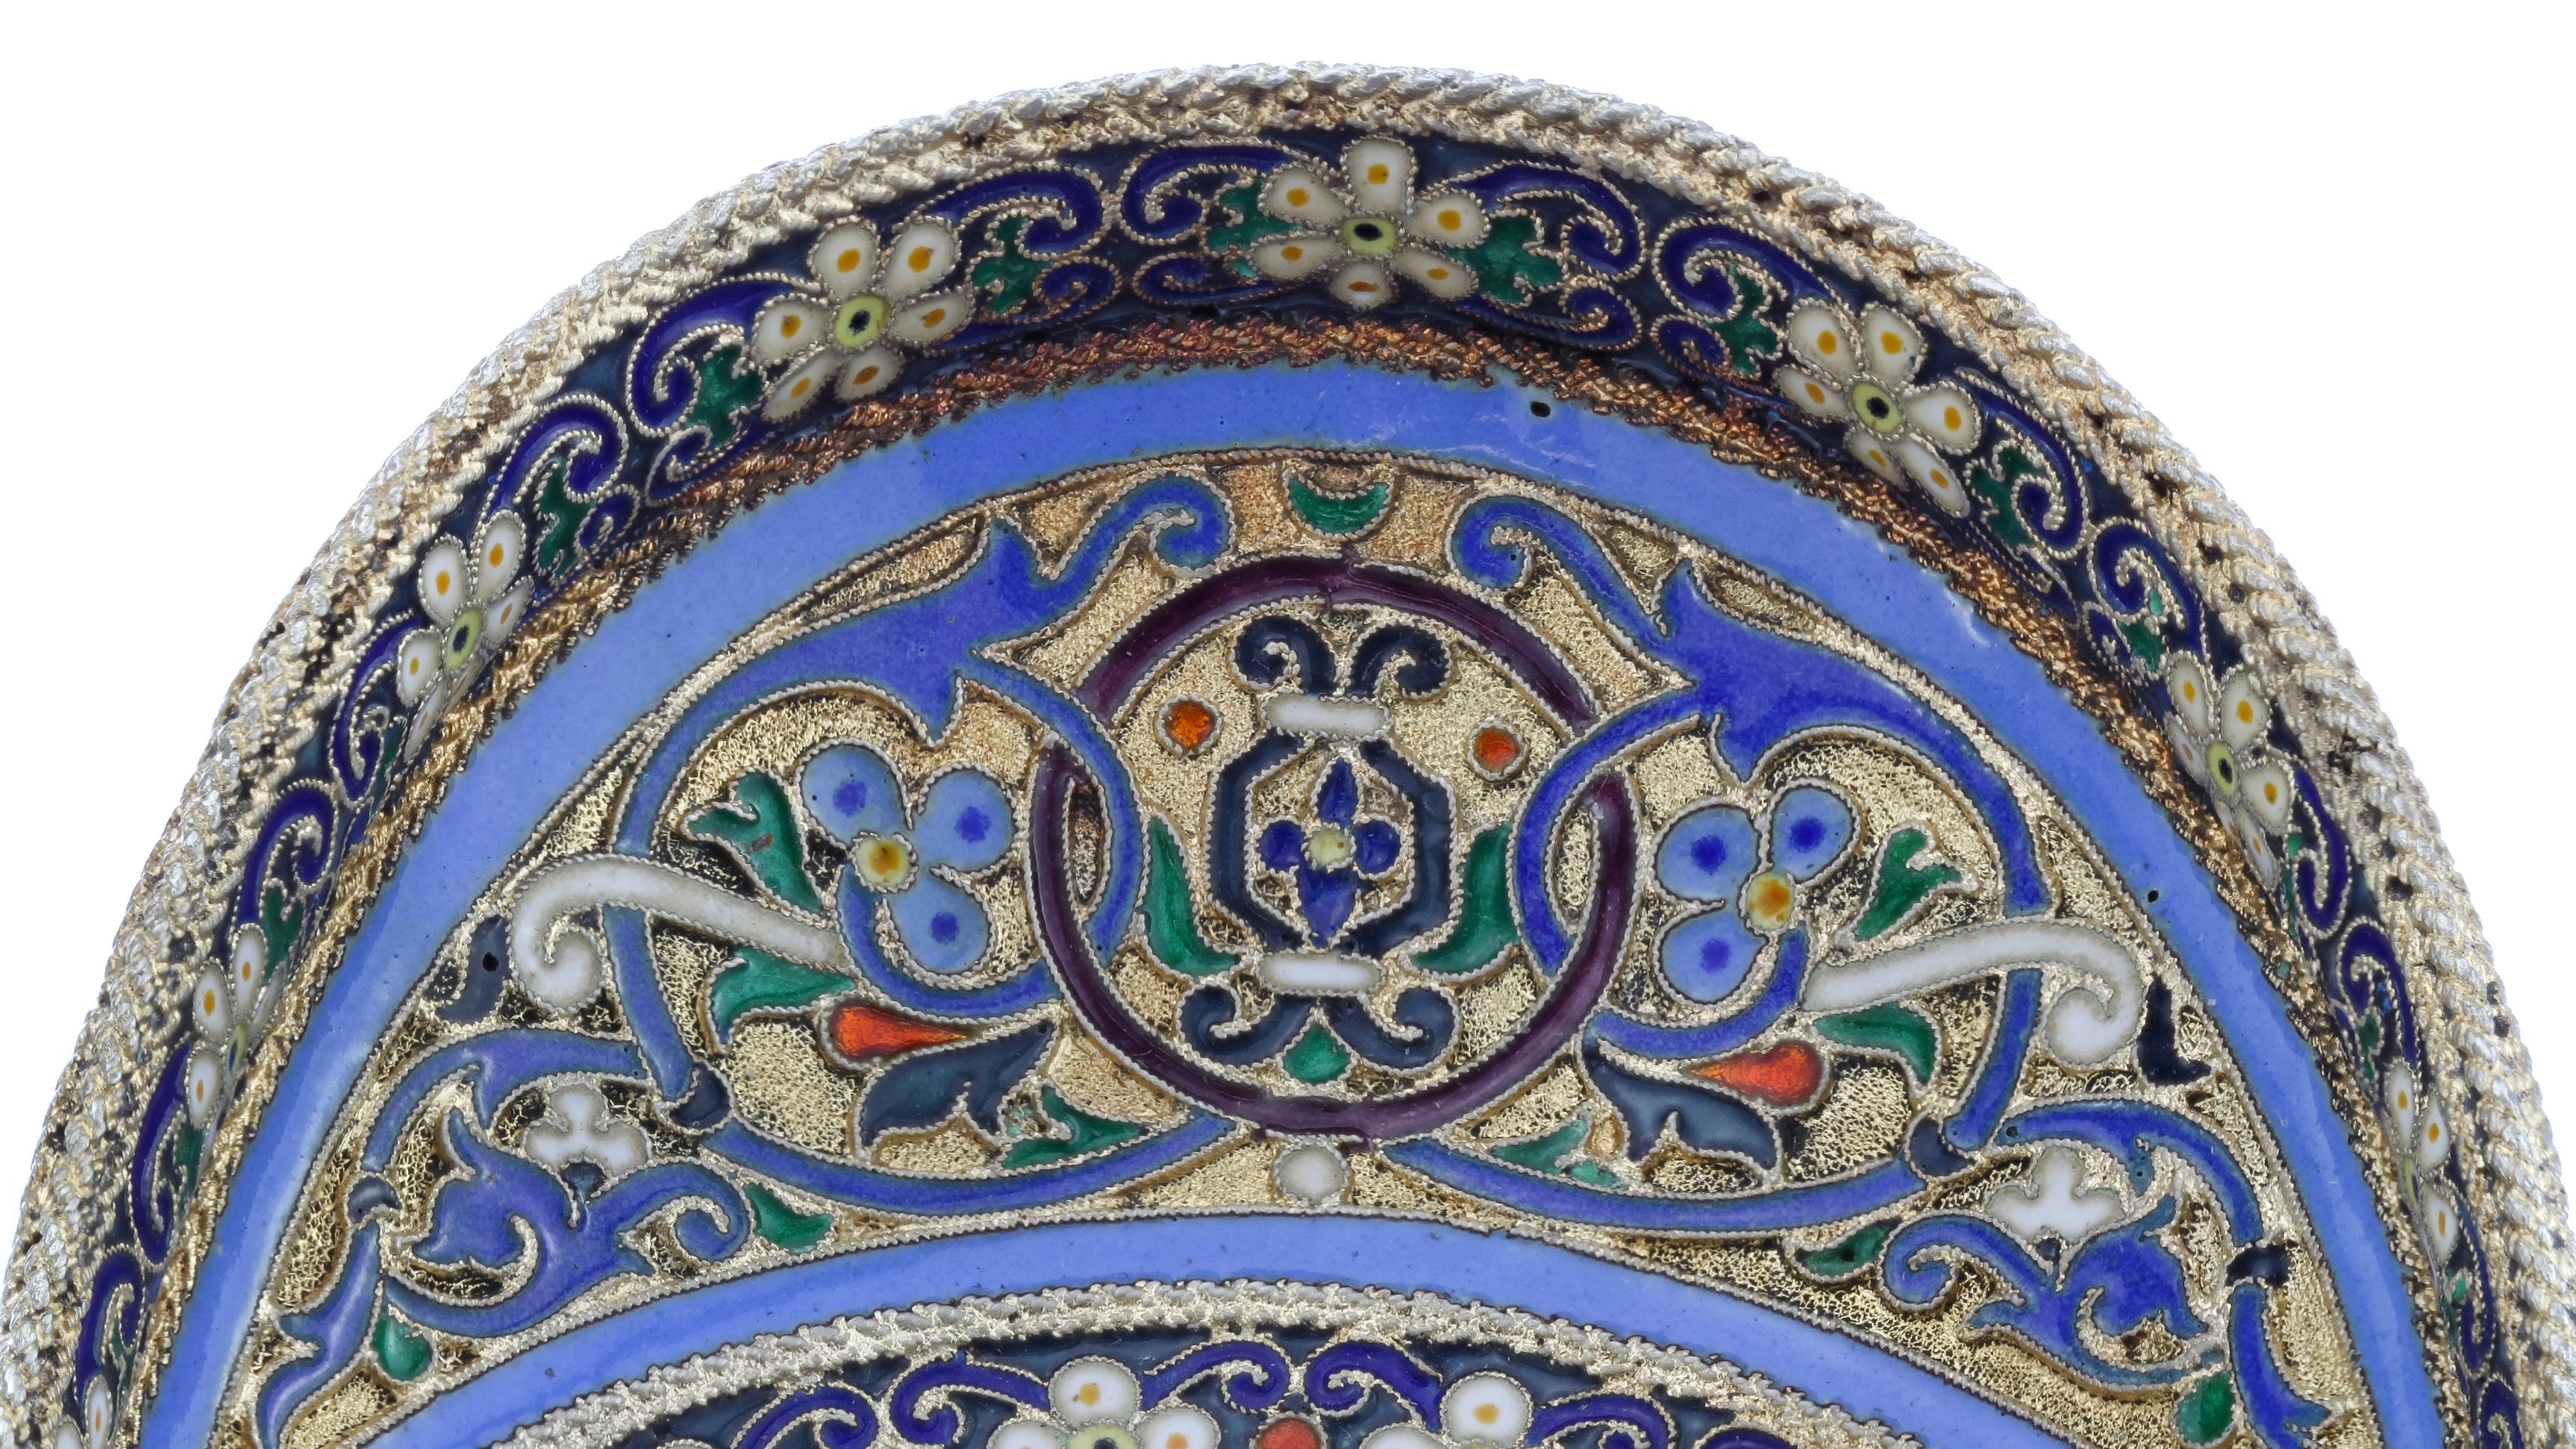 Early 20th Century Russian Silver Cloisonné Enamel Dish, 1890s by Ovchinnikov